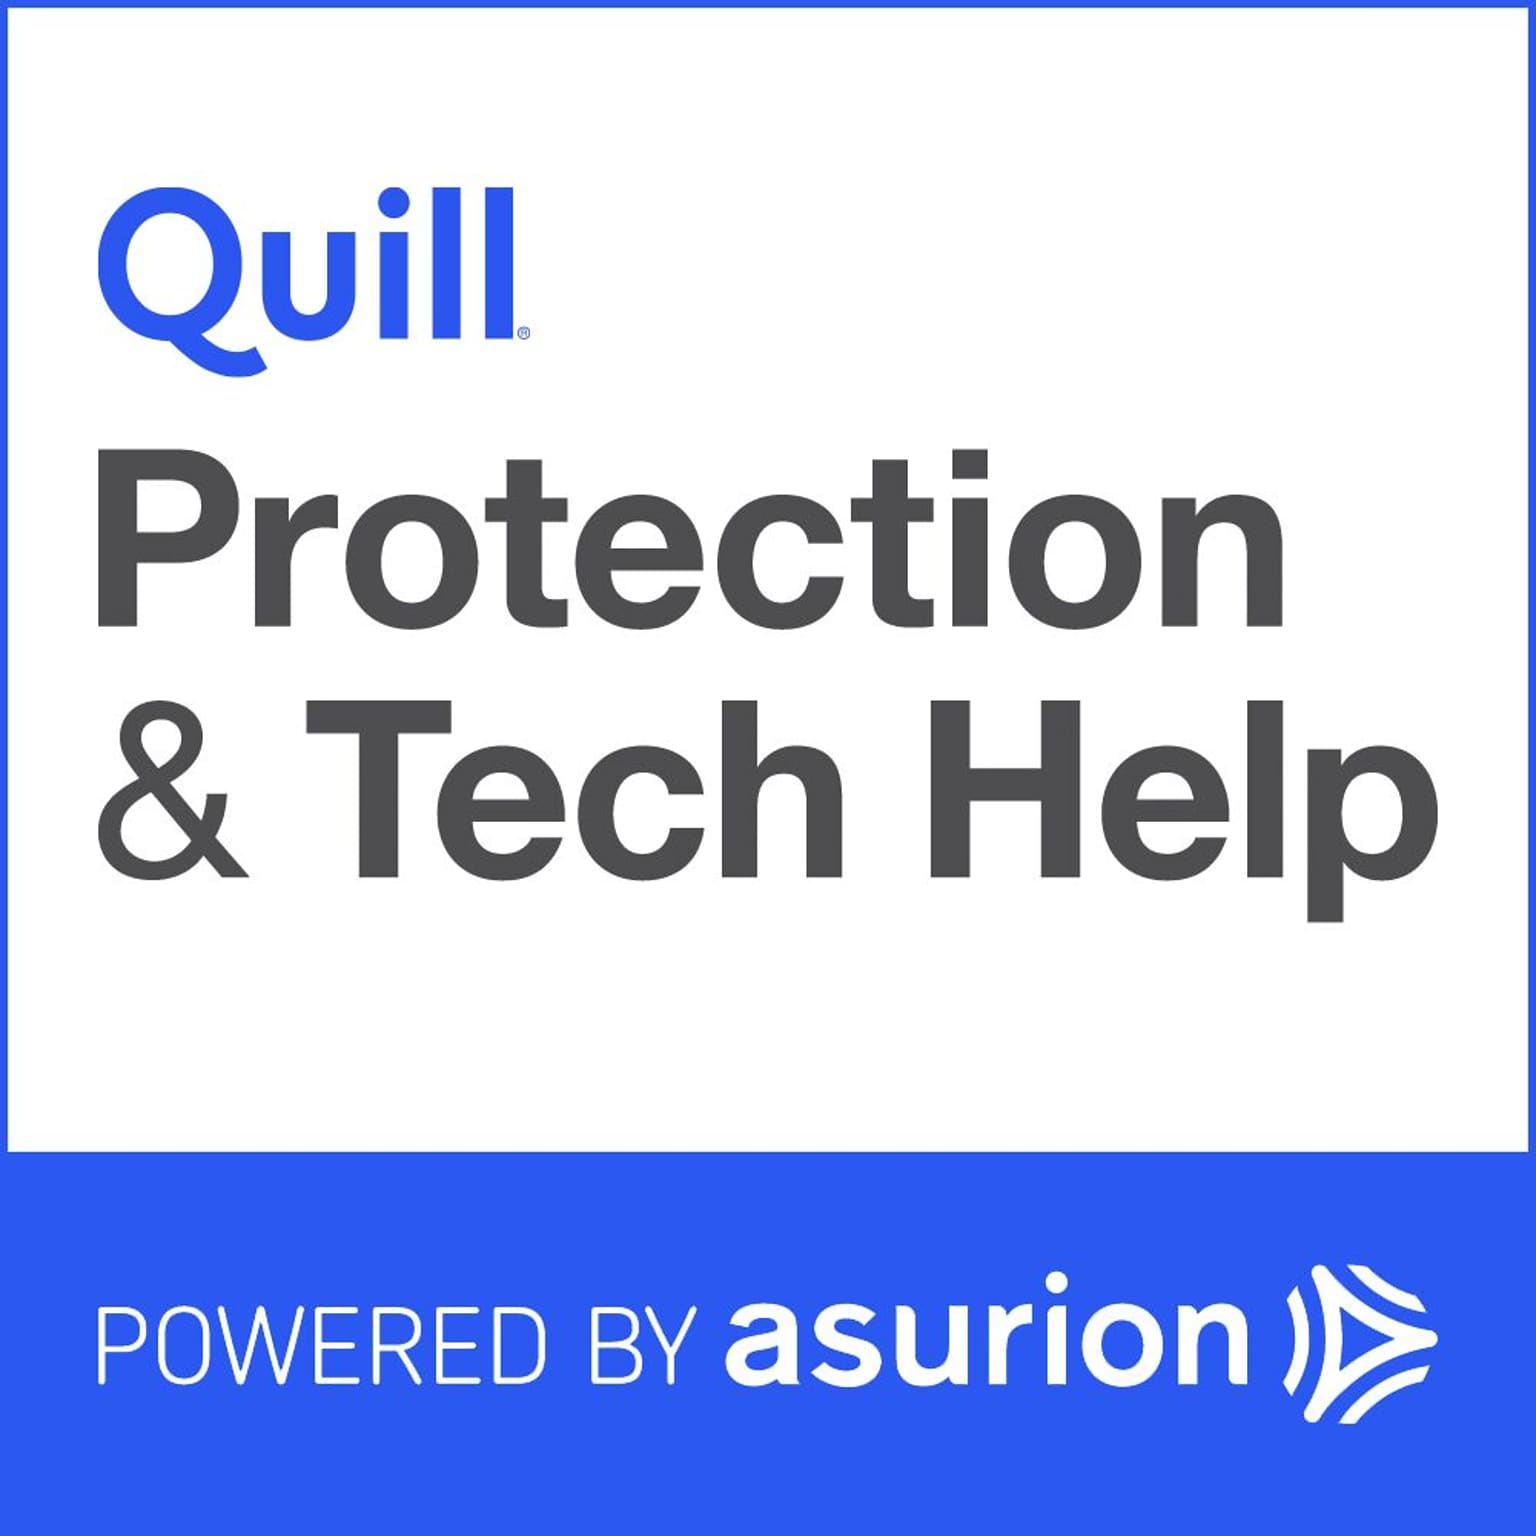 Quill.com 2 Year Connected Device Protection & Tech Help Plan $100-$149.99